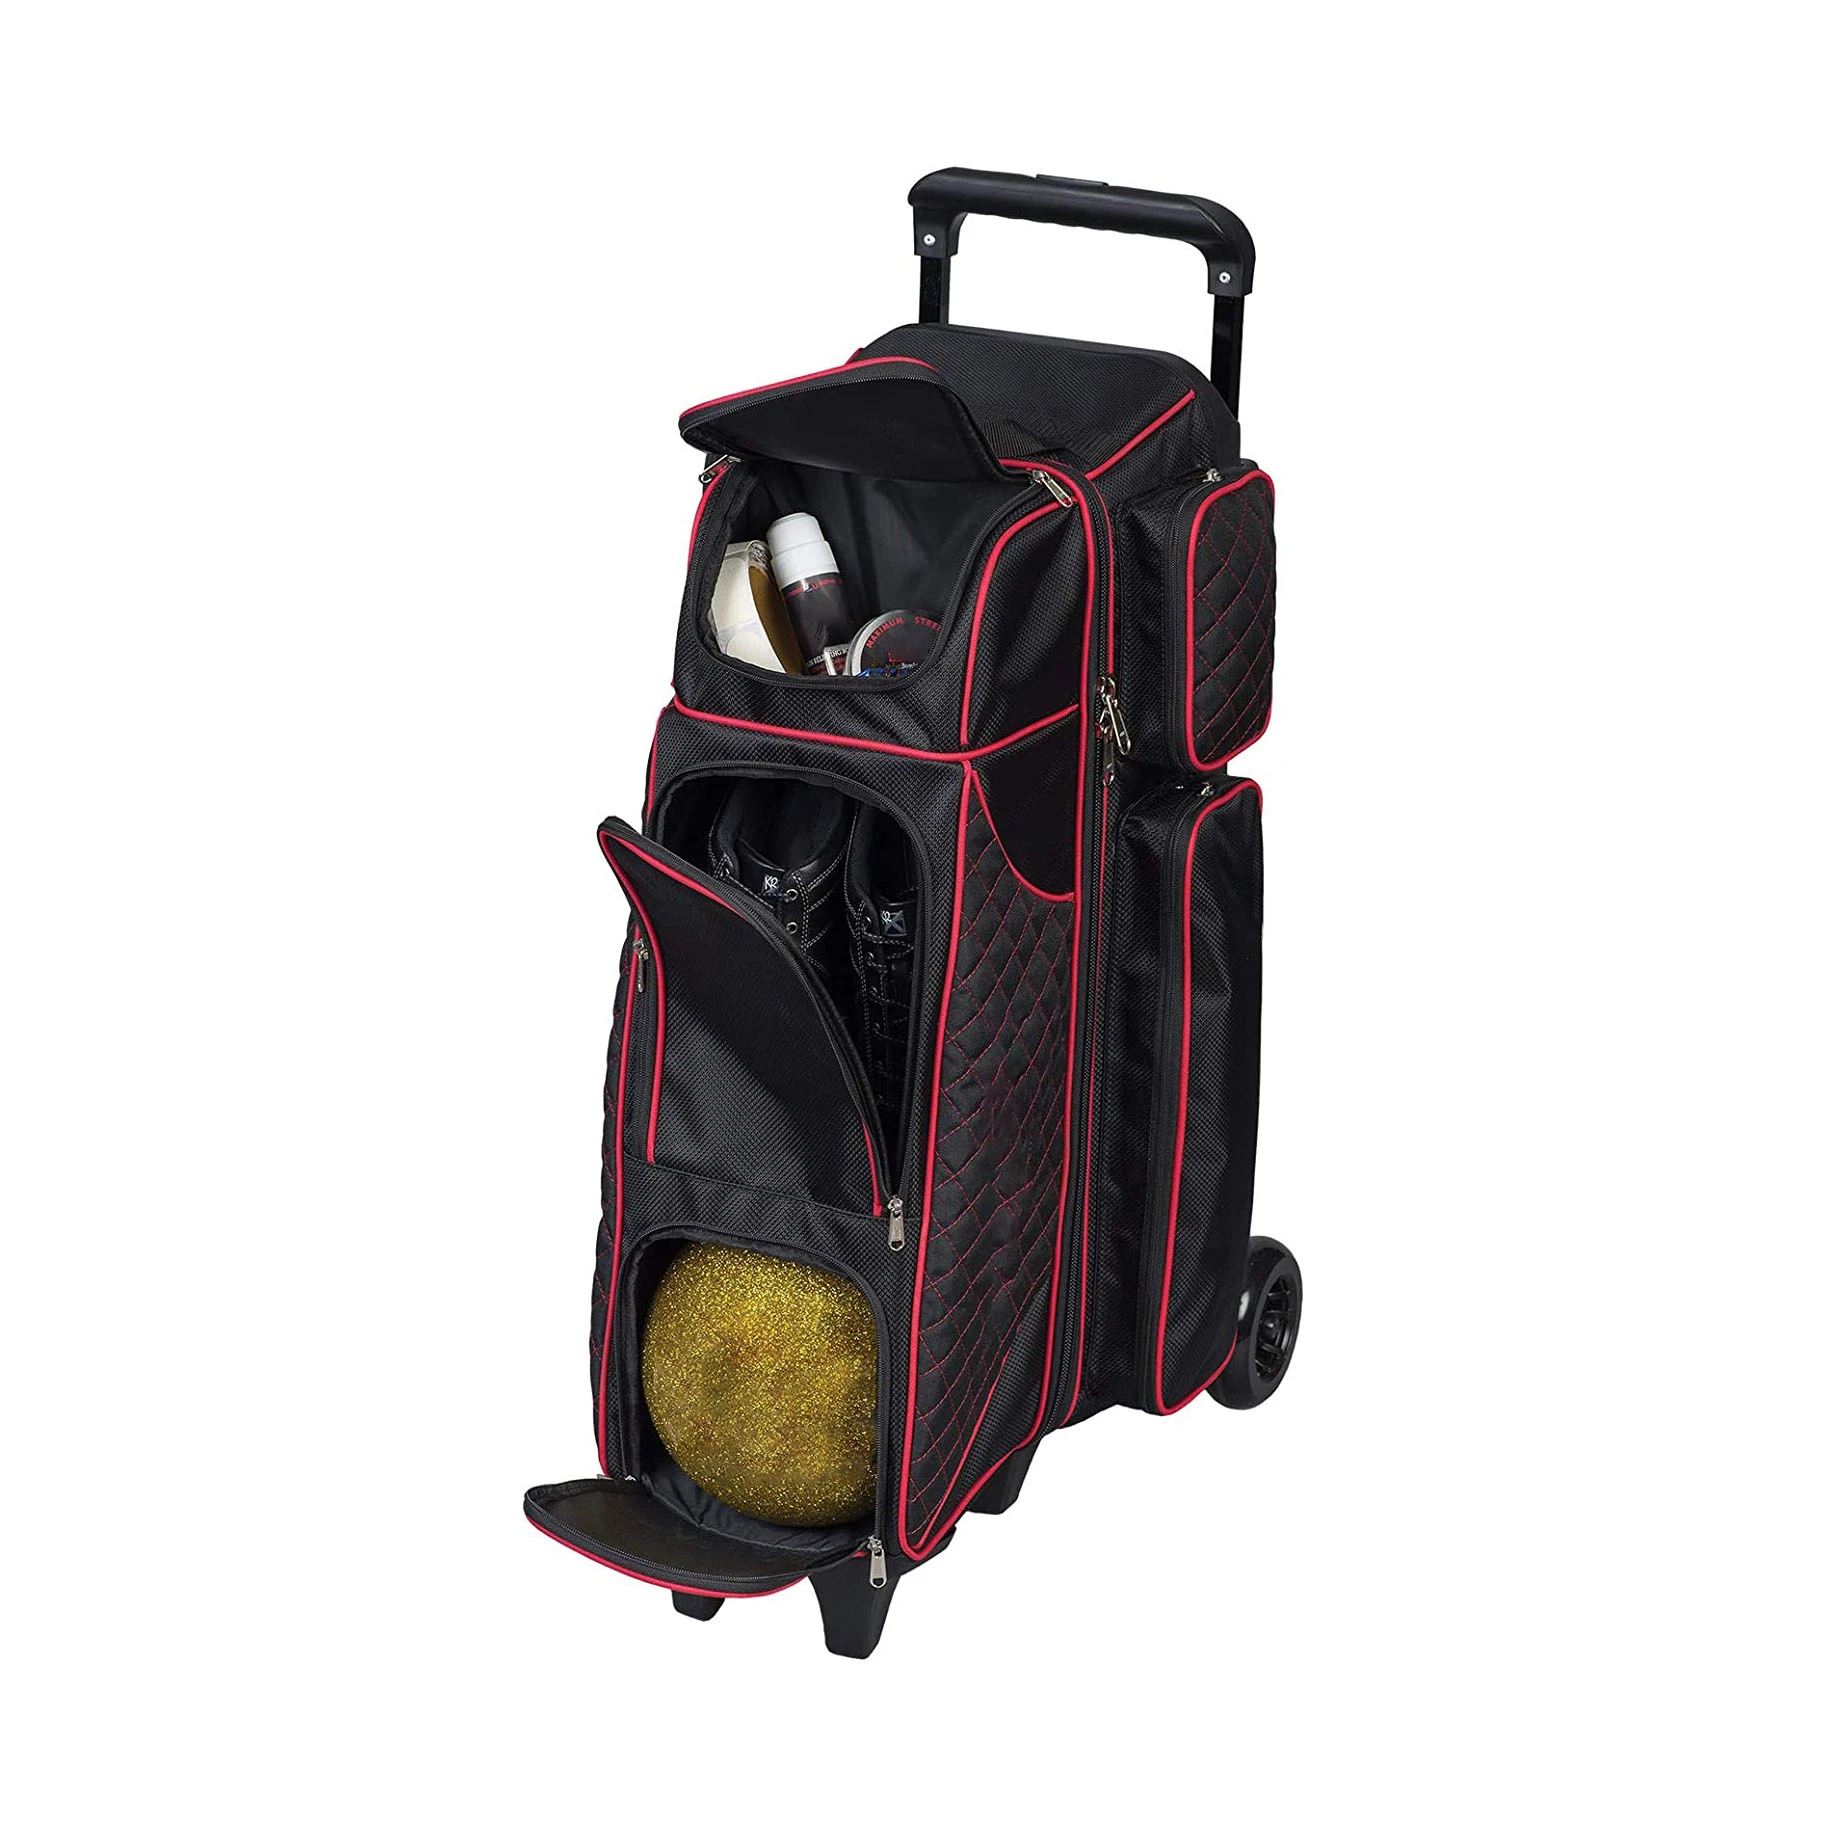 OEM factory wholesale bowling bag 3 balls parts Bowlers Strikeforce Royal Flush 4x4 Blk/Red *ADD OBC*with shoe compartment